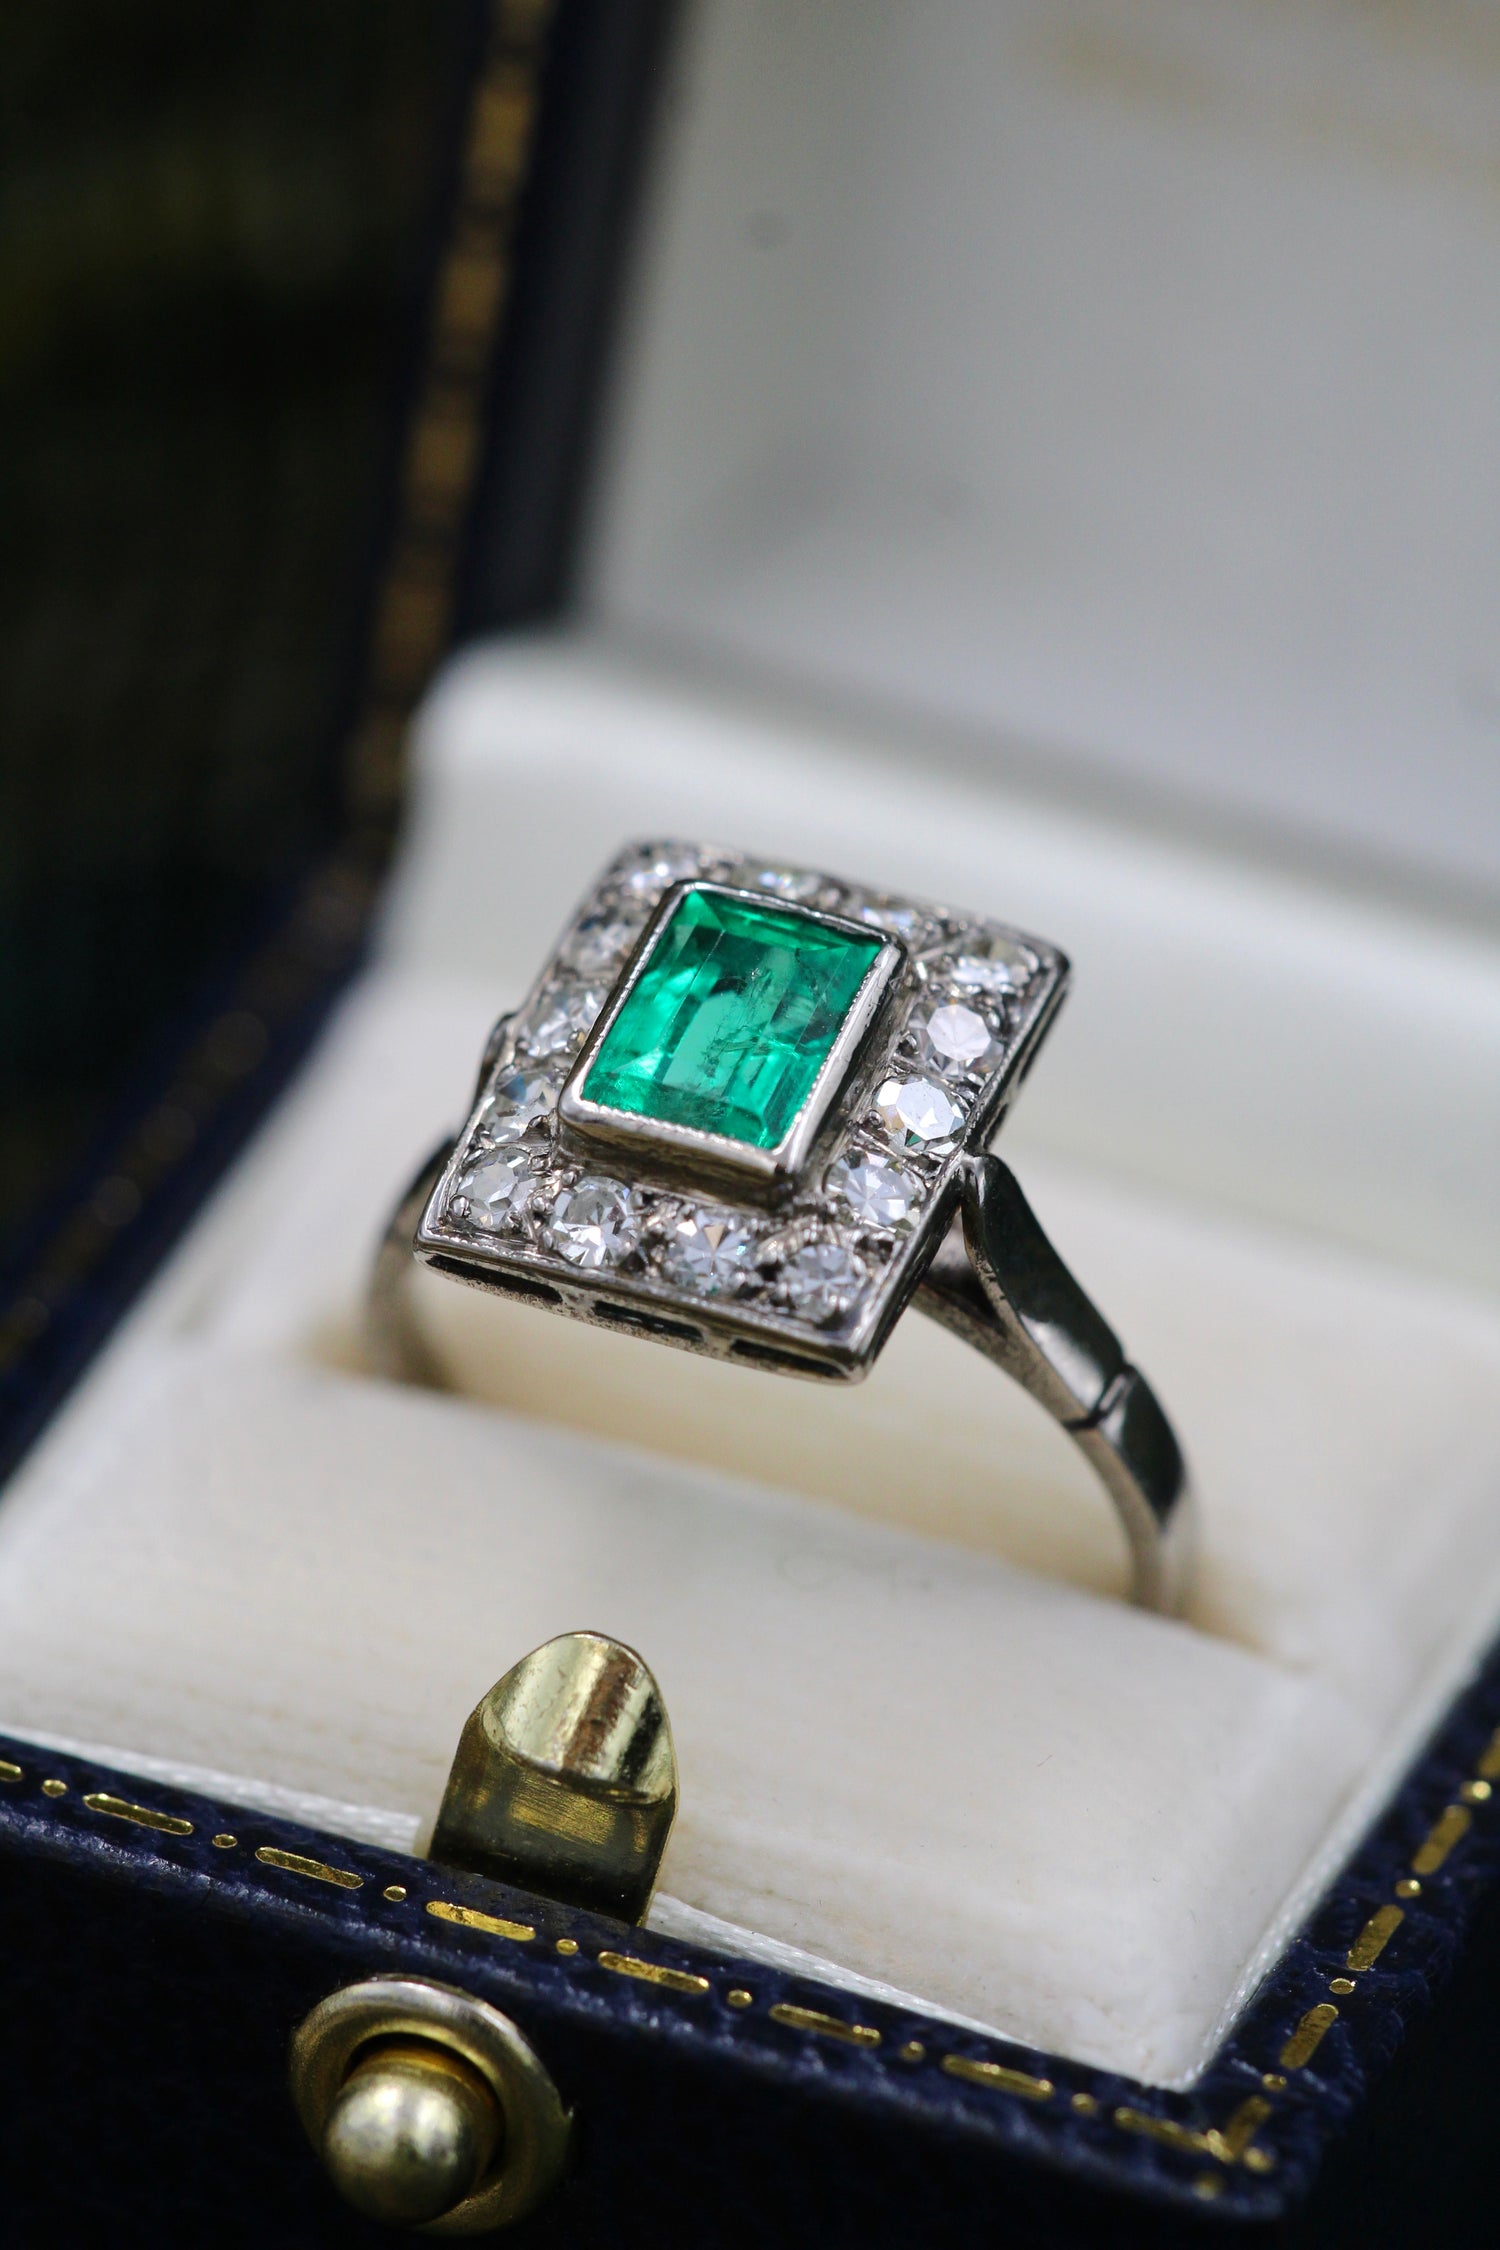 A very fine Platinum (tested) Cluster Ring set with a Modified Step Cut Emerald Certified as 1.10 carats "Colombian" (Moderate Oil), surrounded by gallery of fourteen Single Cut Diamonds. Circa 1930 - Robin Haydock Antiques